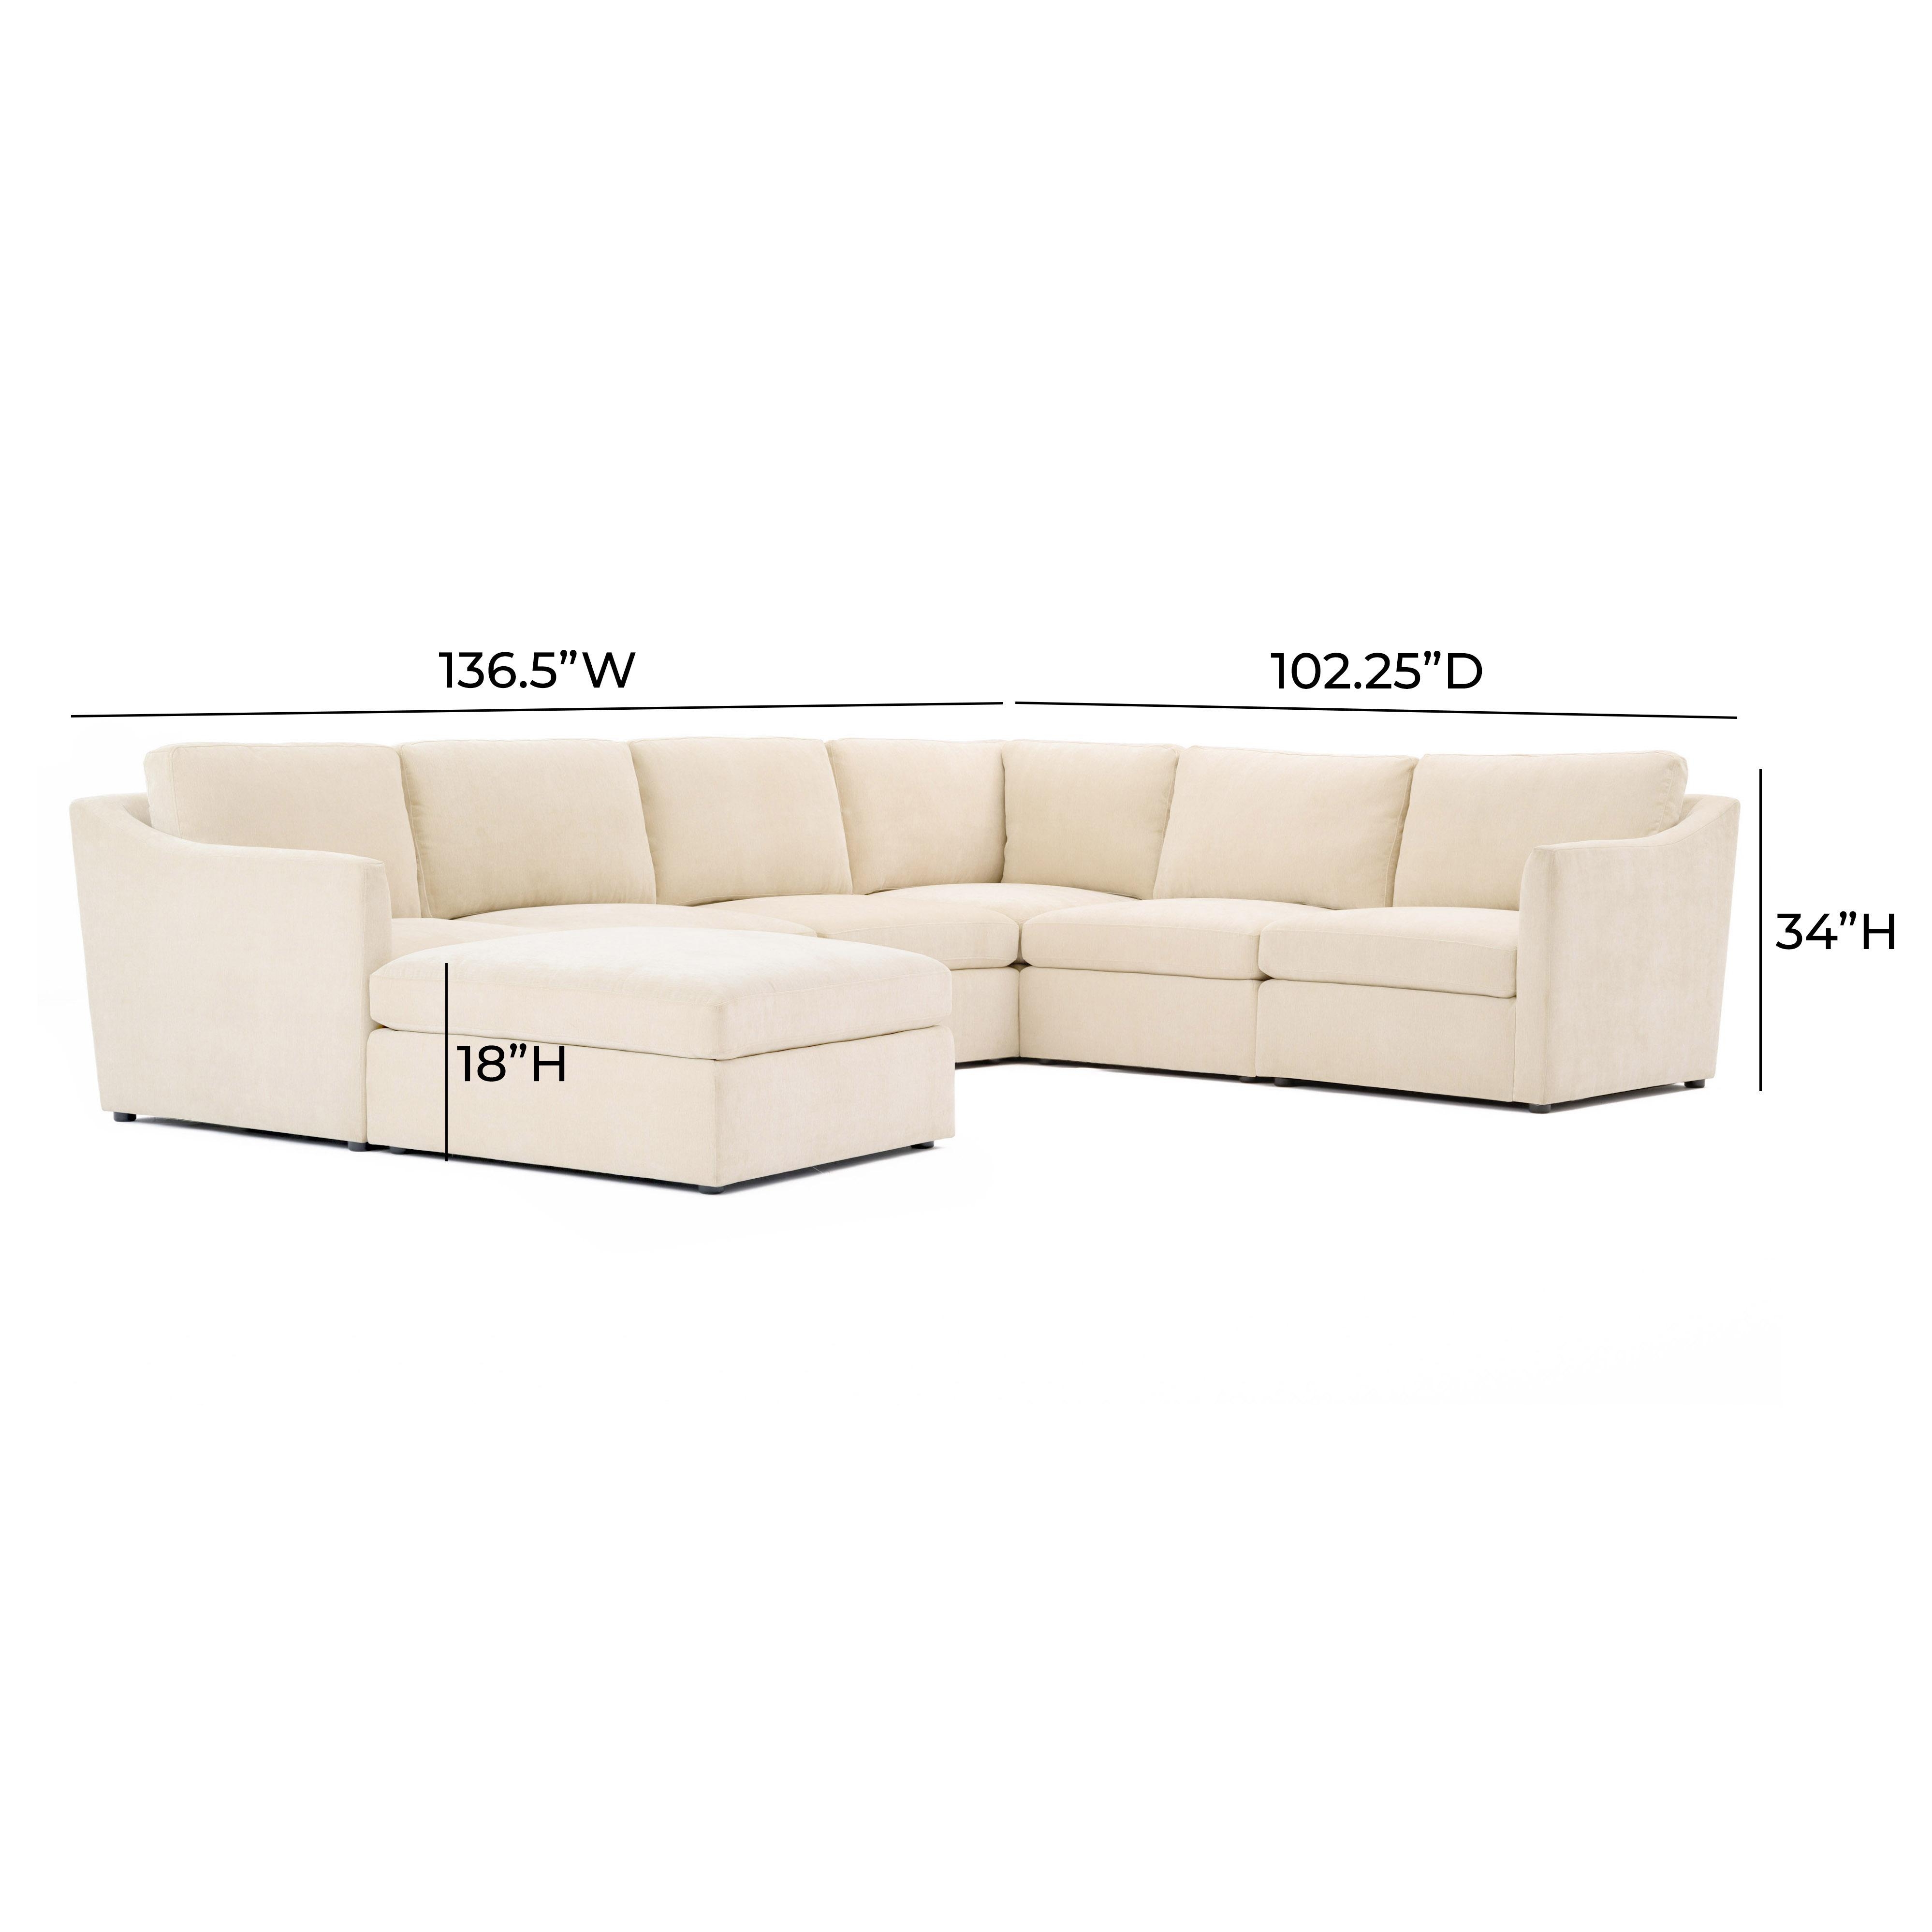 Aiden Beige Modular Large Chaise Sectional - Image 3